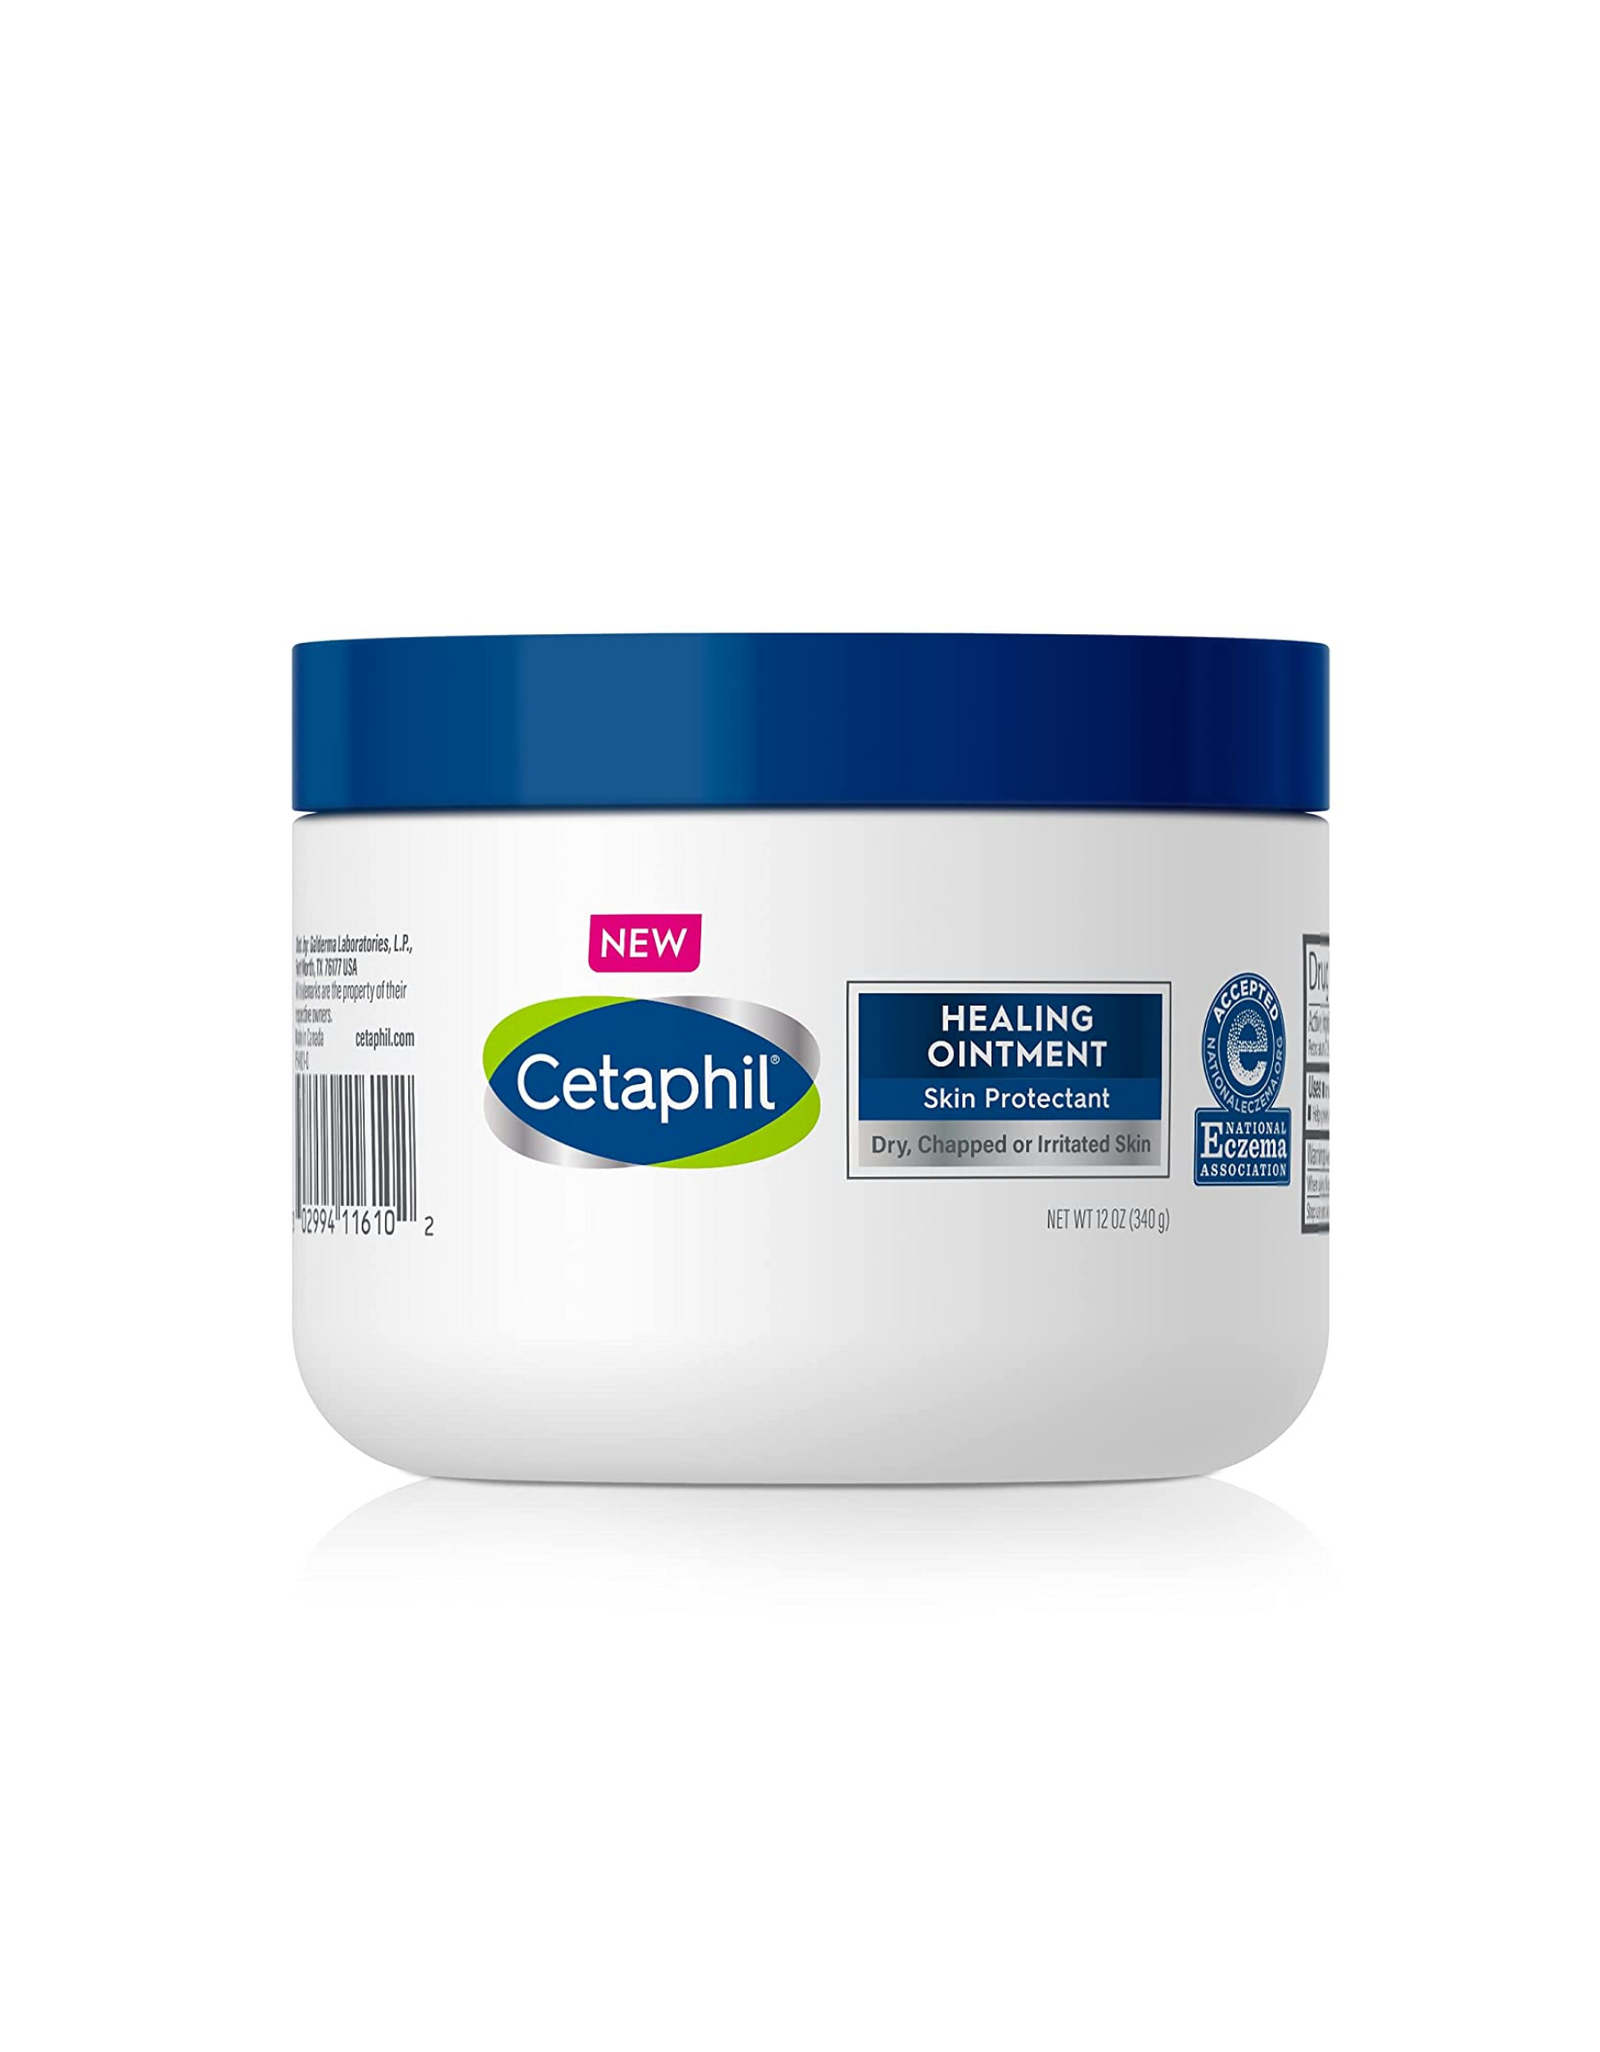 CETAPHIL Healing Ointment , 12 oz - Skin Protectant, For Dry, Chapped, Irritated Skin